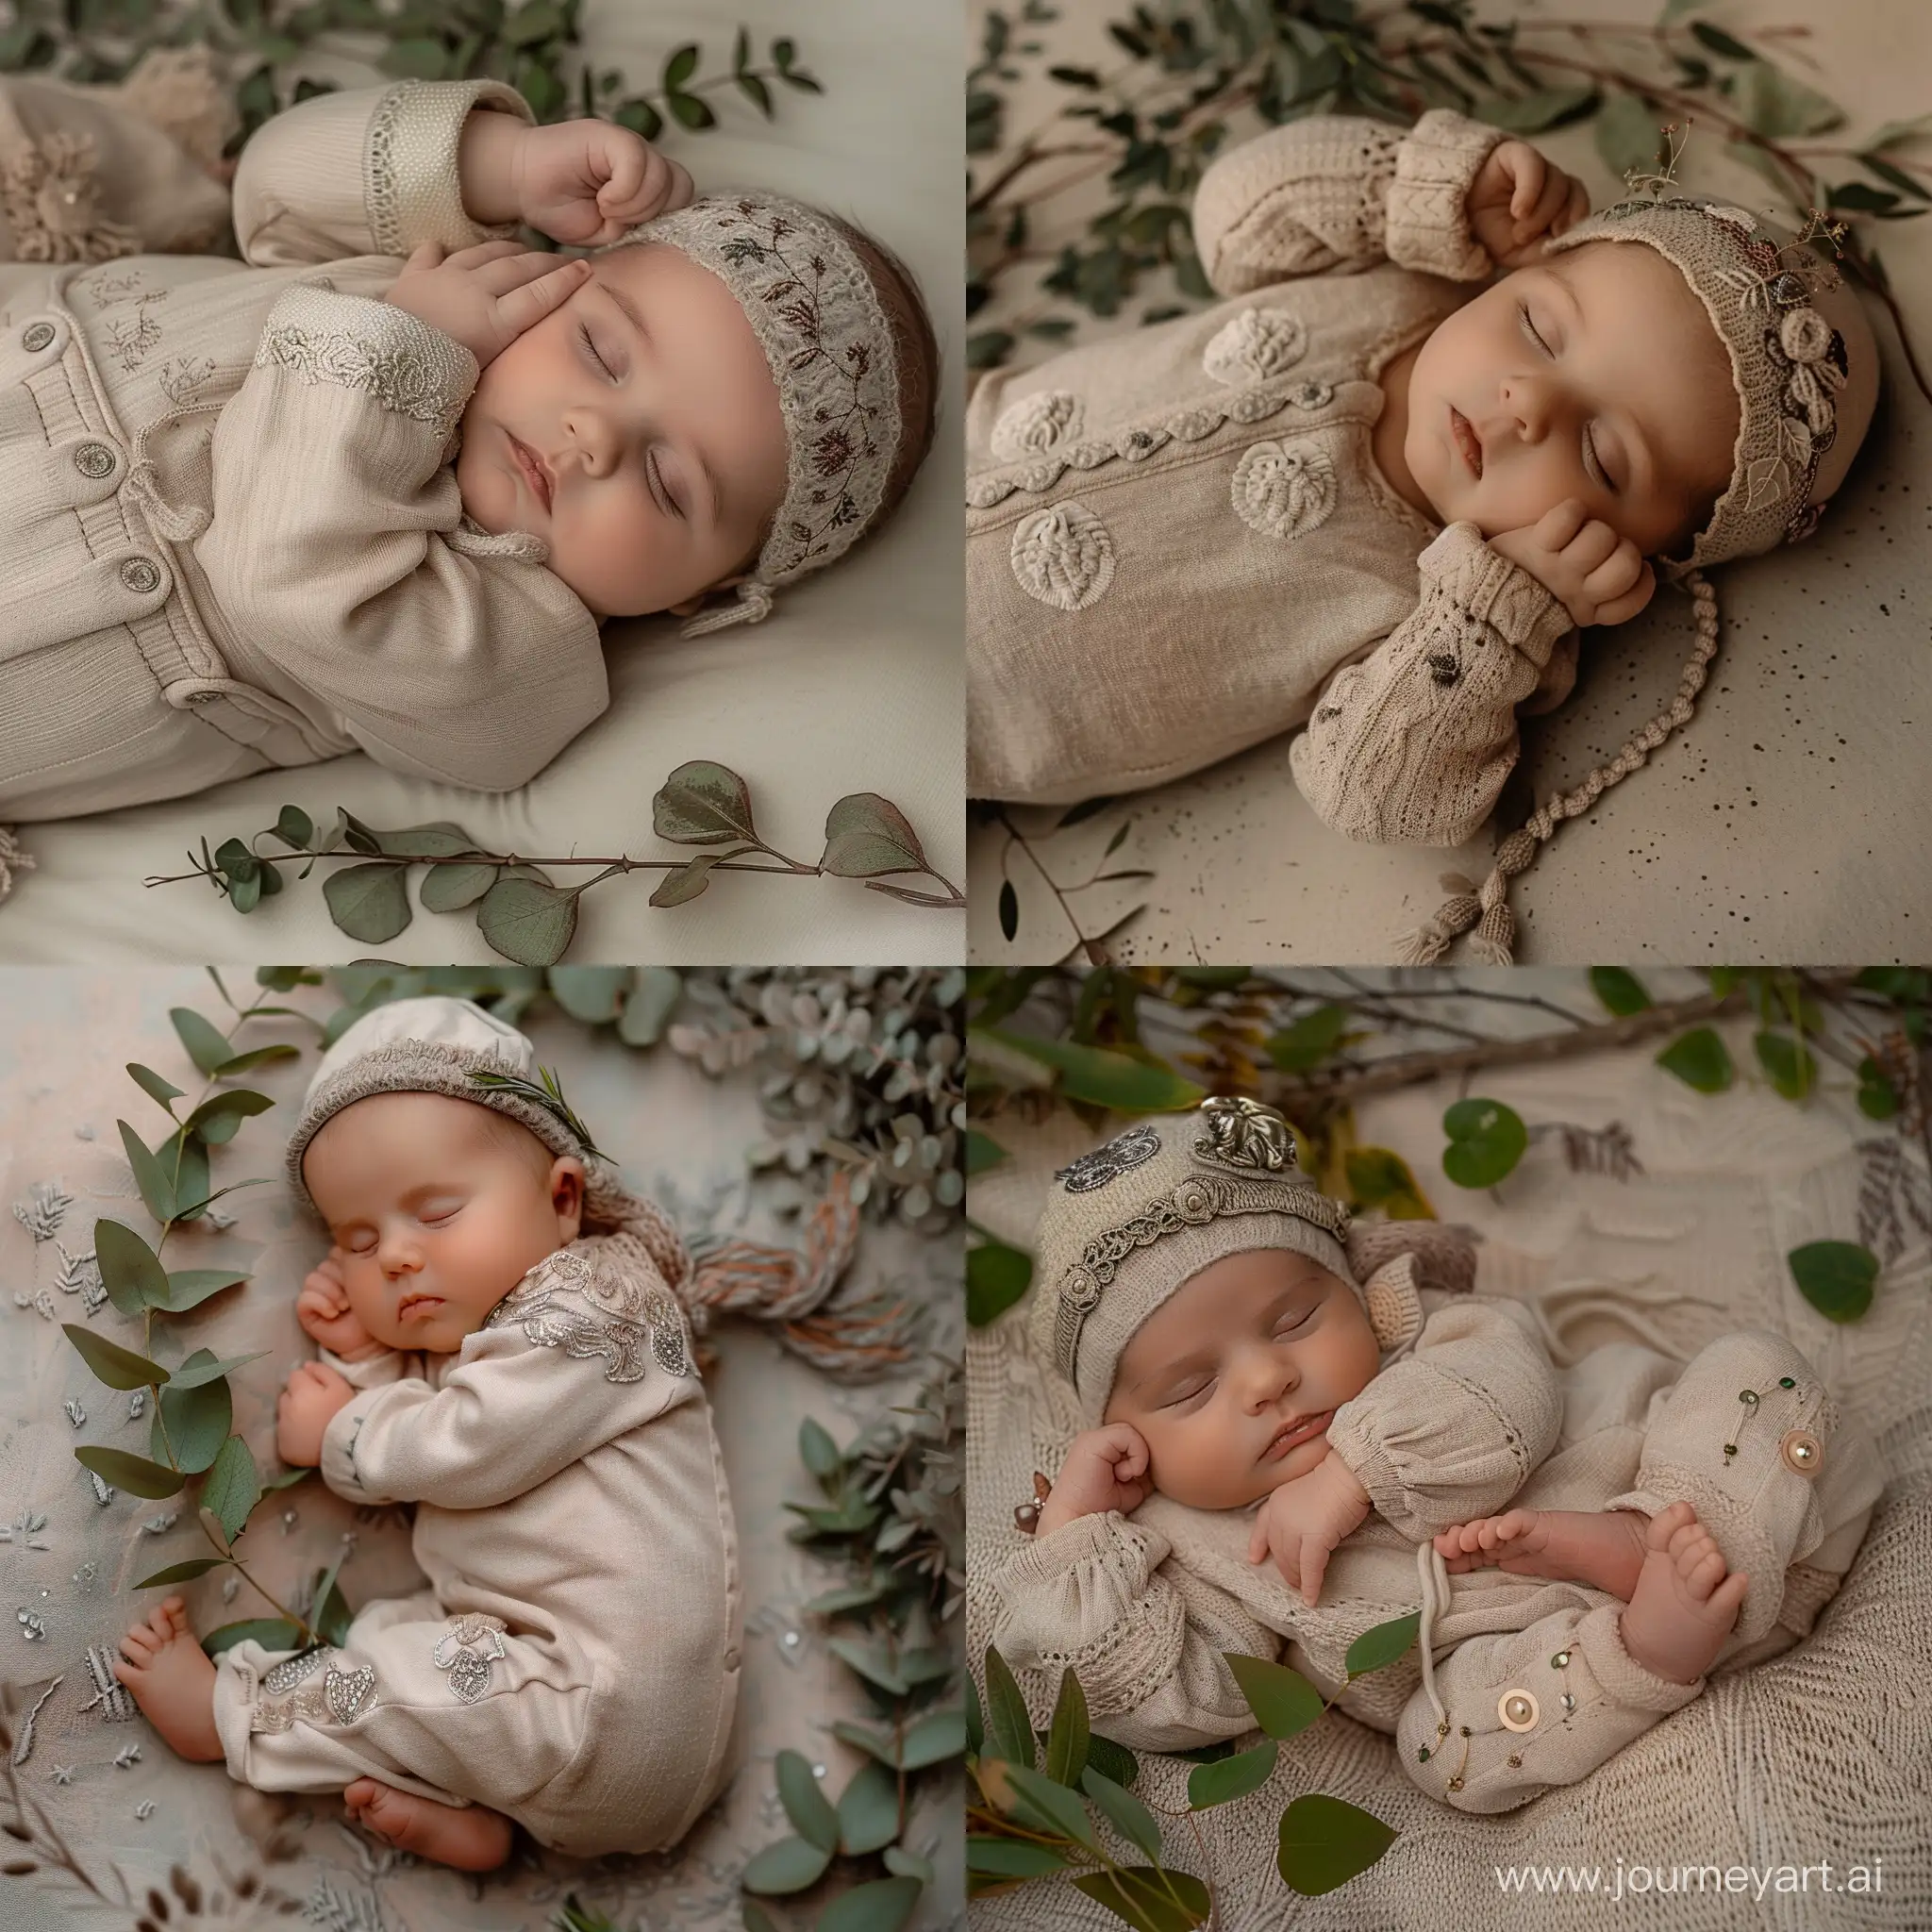 Peaceful-Baby-Nap-in-Beige-Jumpsuit-Surrounded-by-Nature